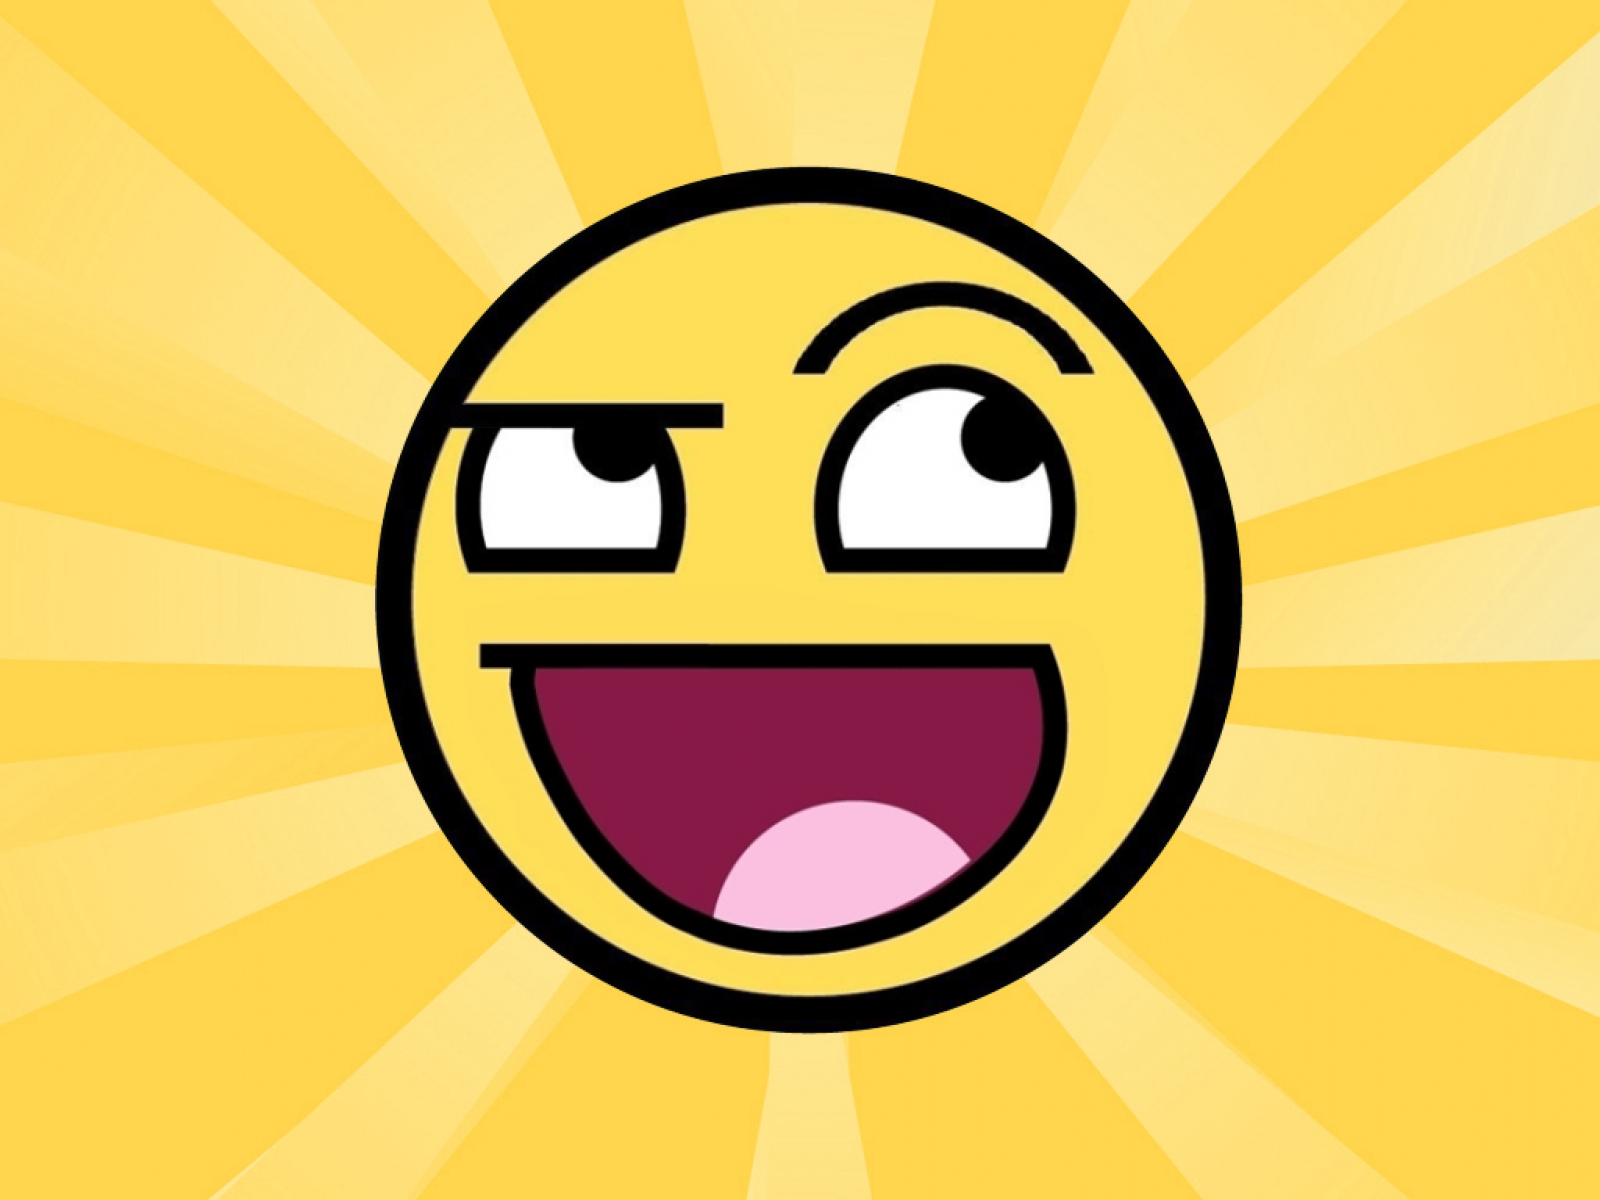 Awesome Smiley Wallpaper Image Amp Pictures Becuo